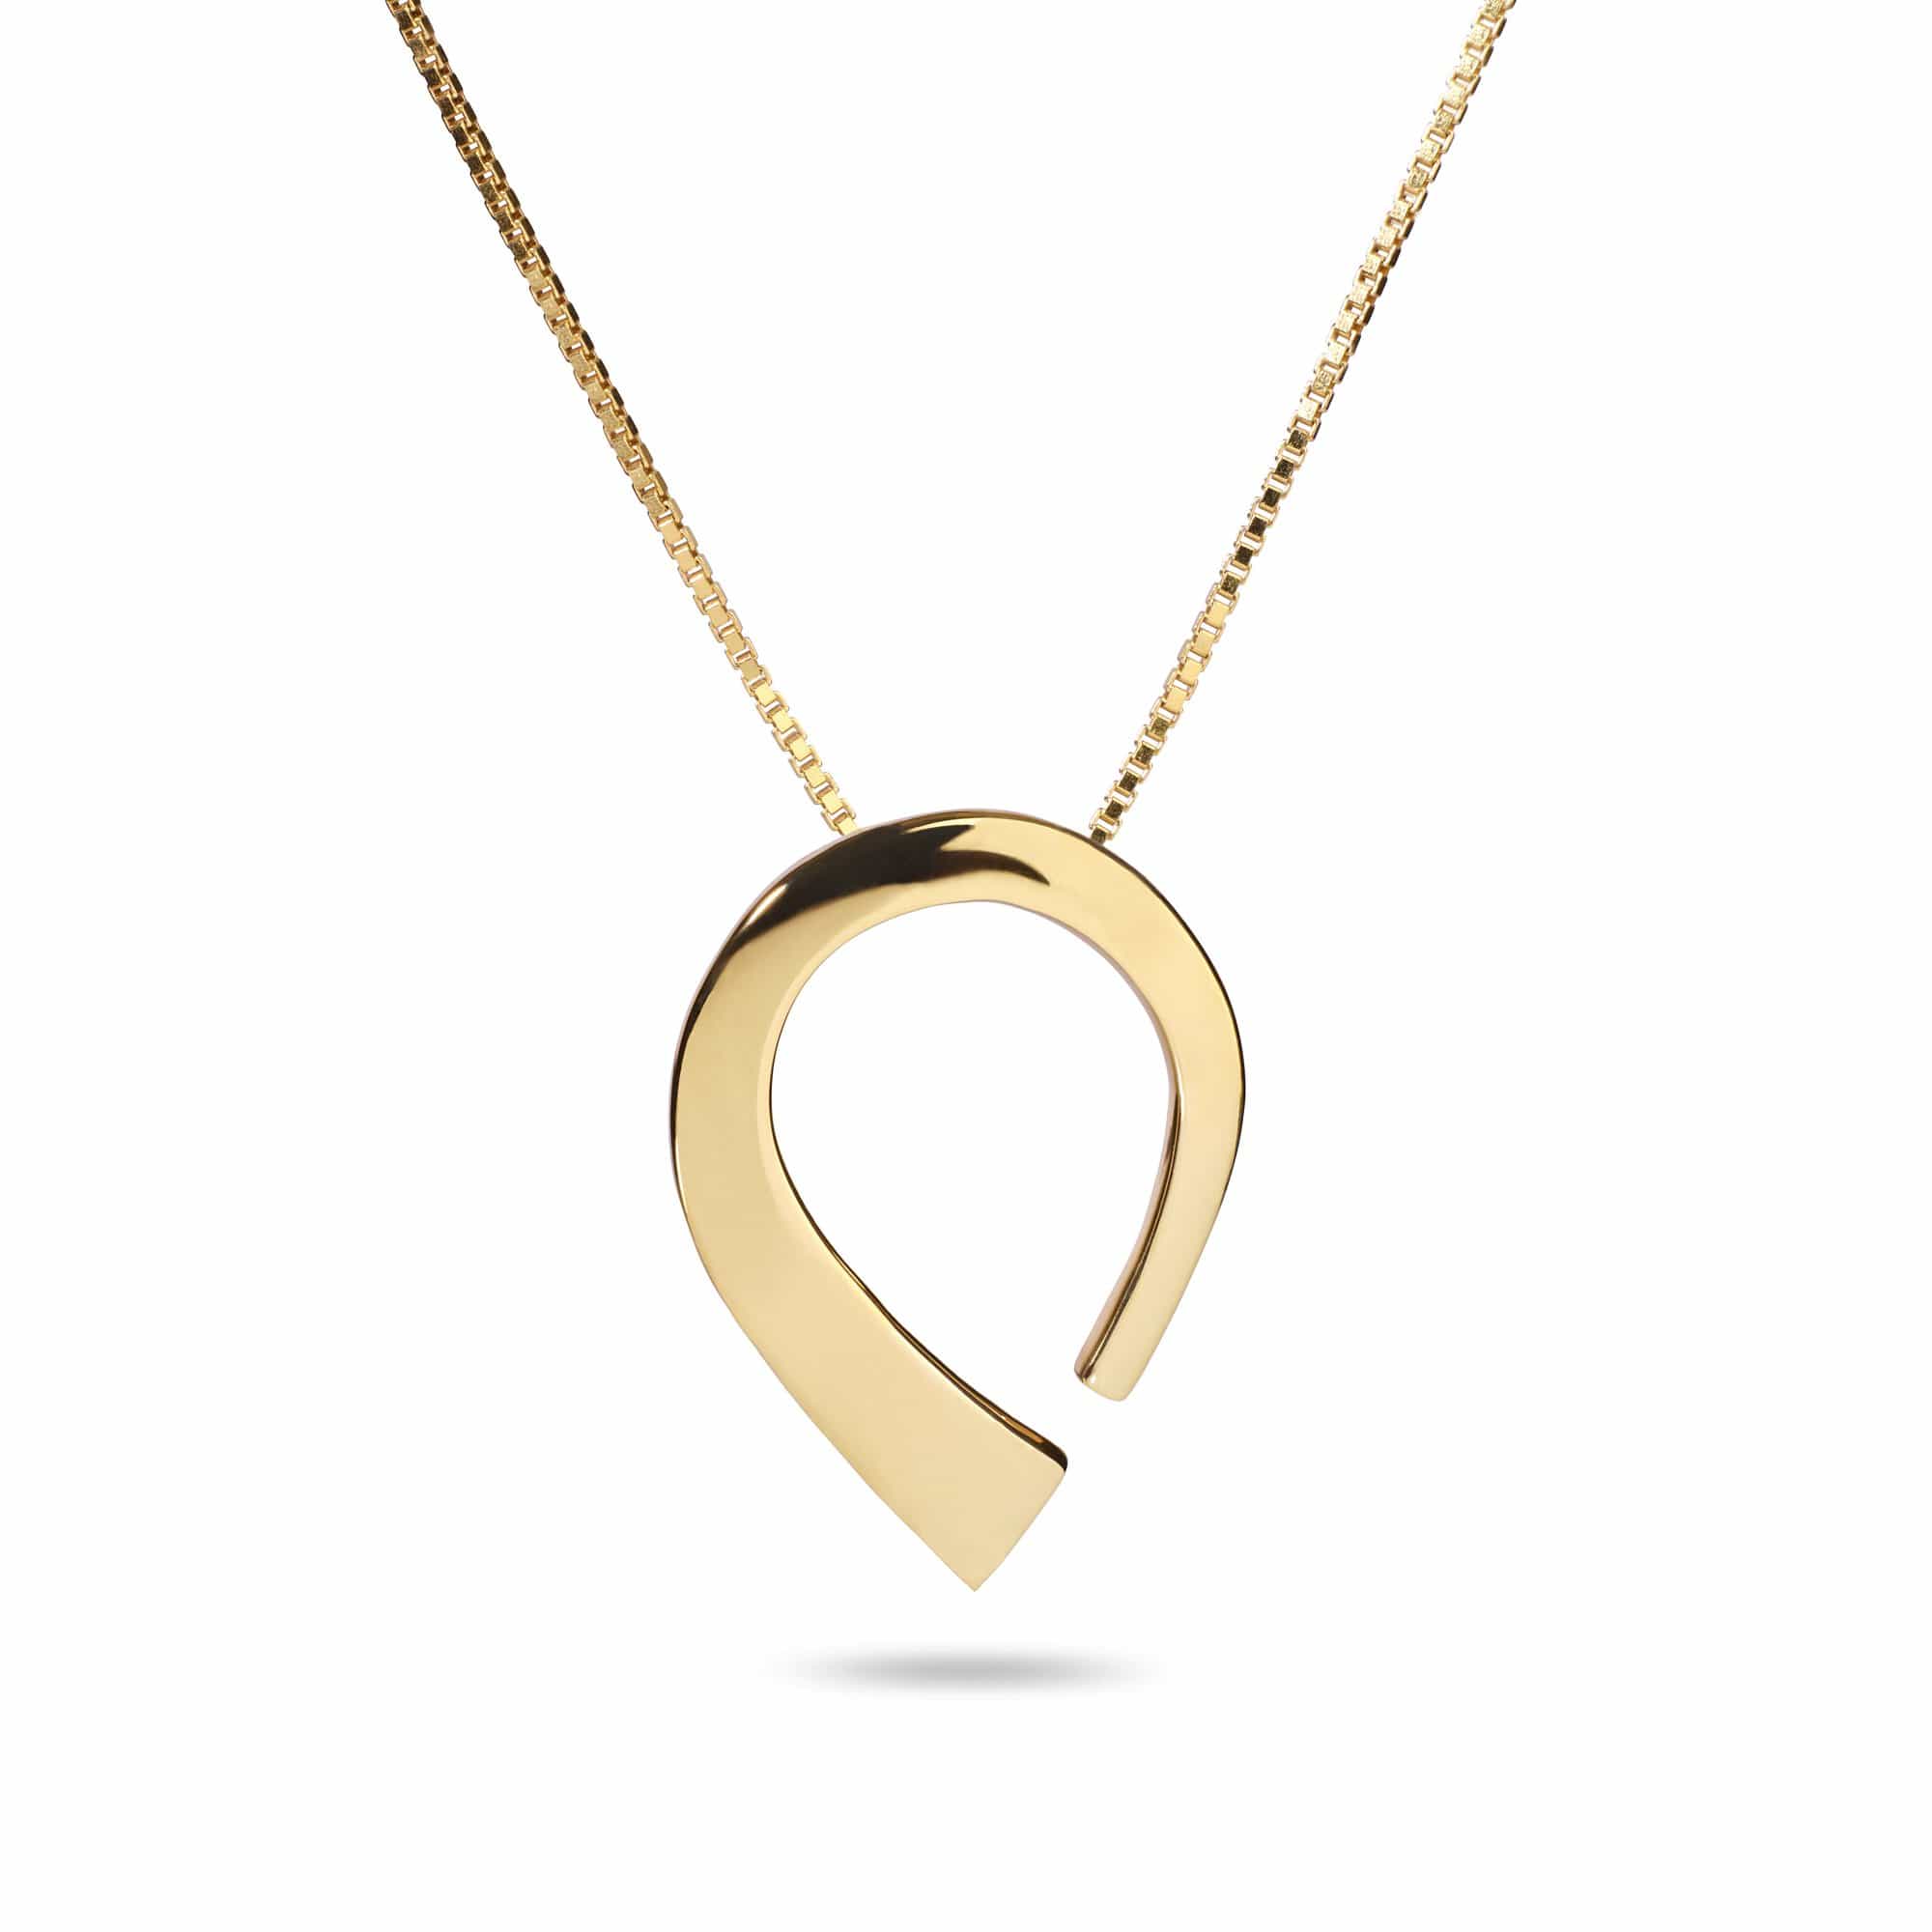 Exclusive rounded gold necklace by Ekenberg